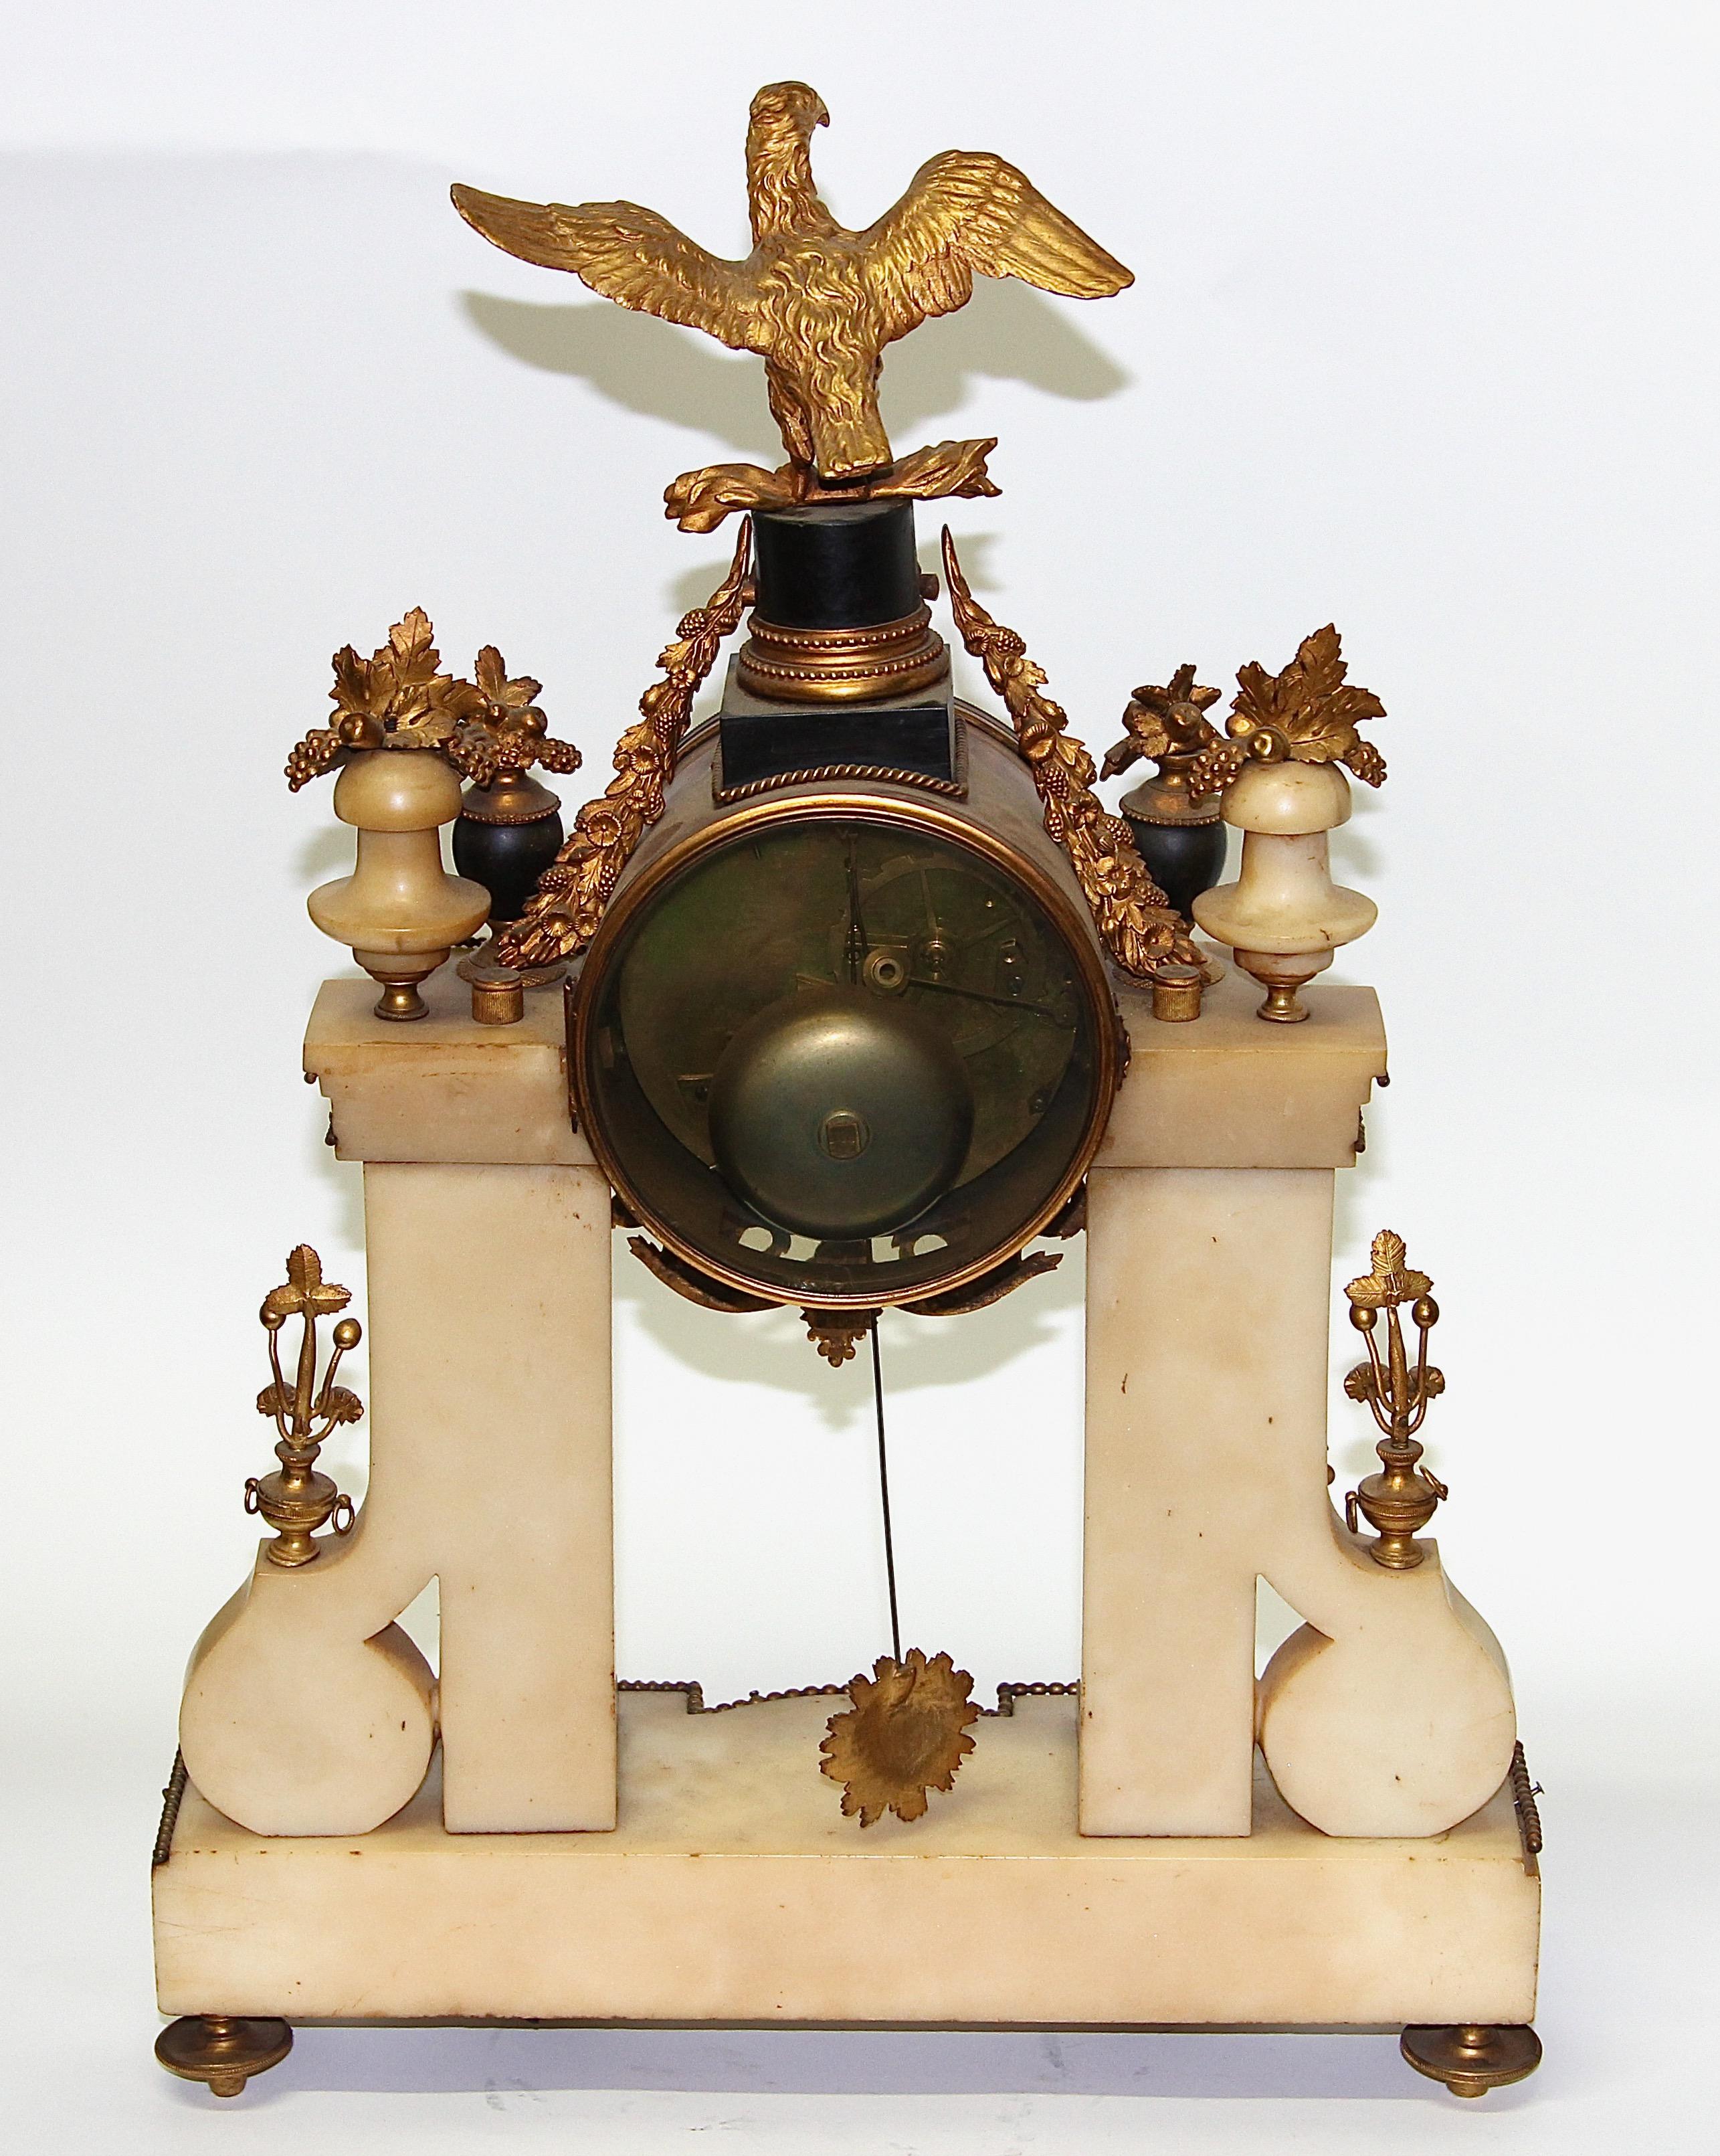 French Empire Ormolu Mantel Clock by Deverberie a Paris, Fire-Gilded For Sale 3